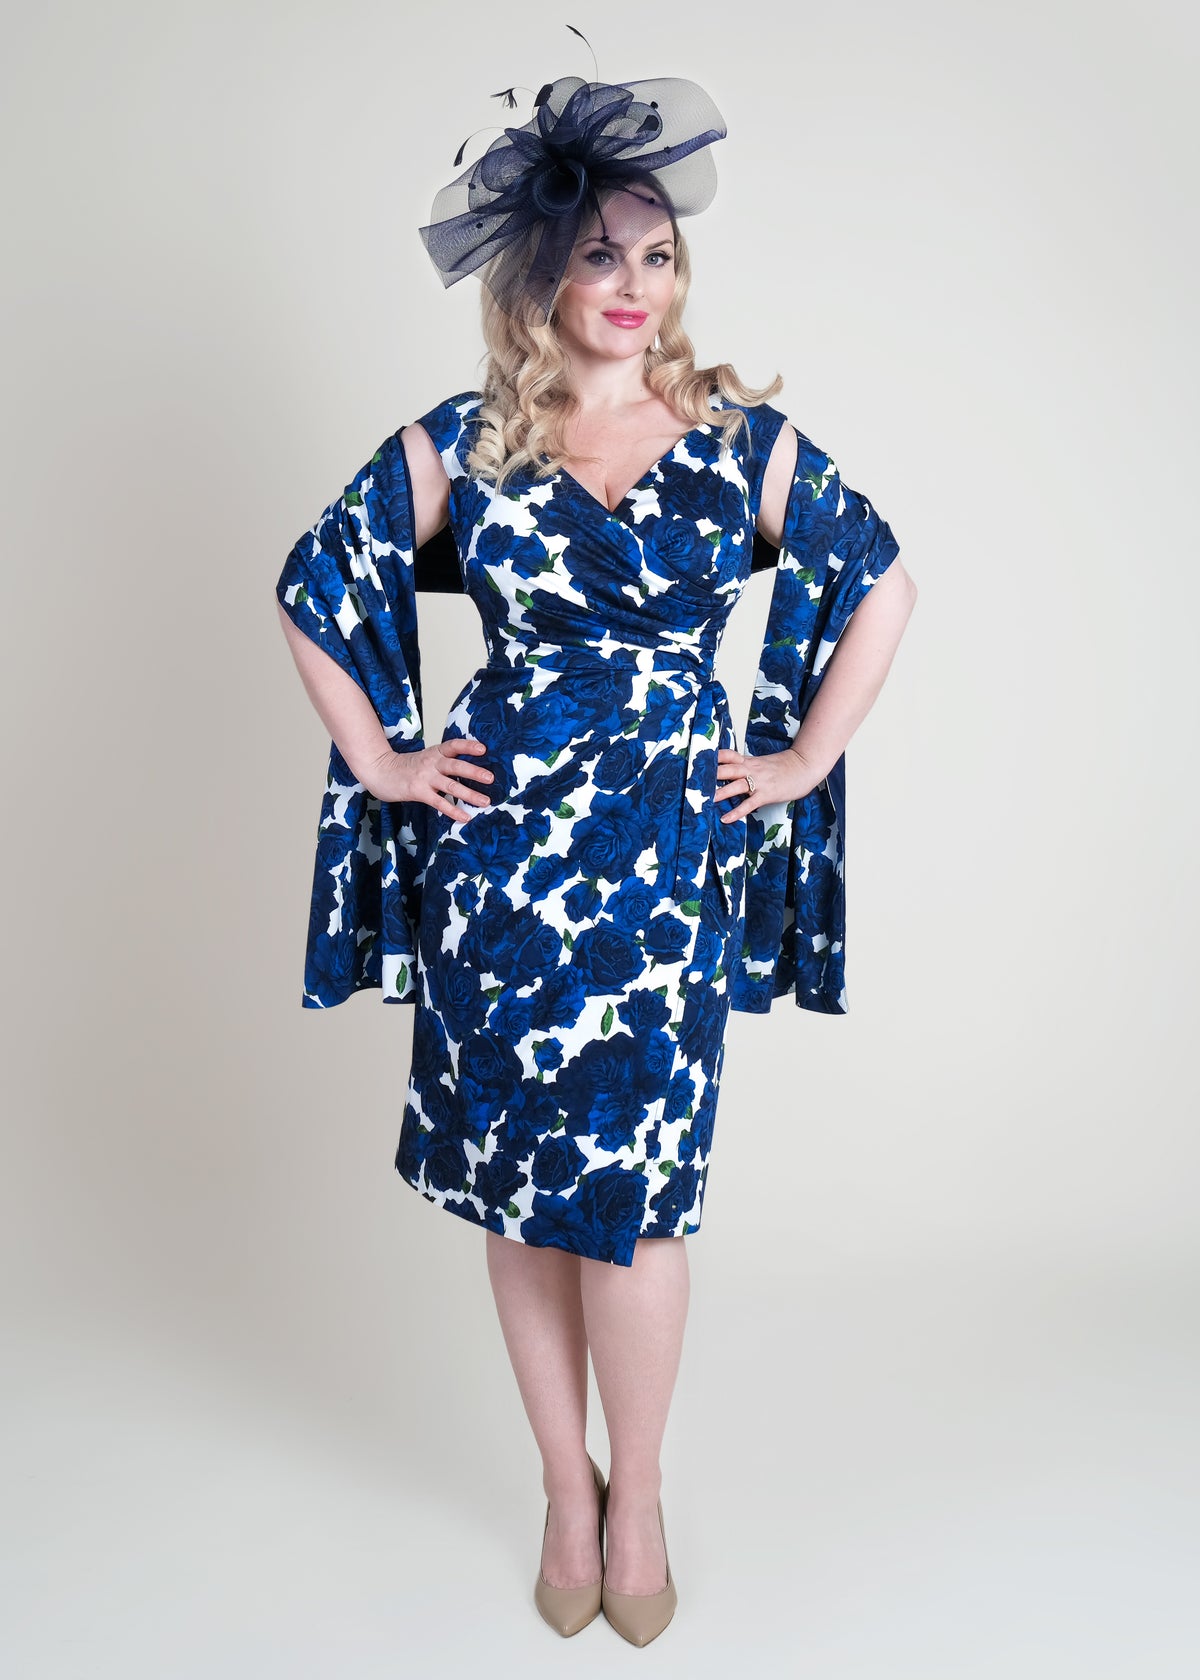 Bombshell blue and white floral dress with elegant fascinator, stylish mid-length pencil dress for special occasion, chic women's fashion.